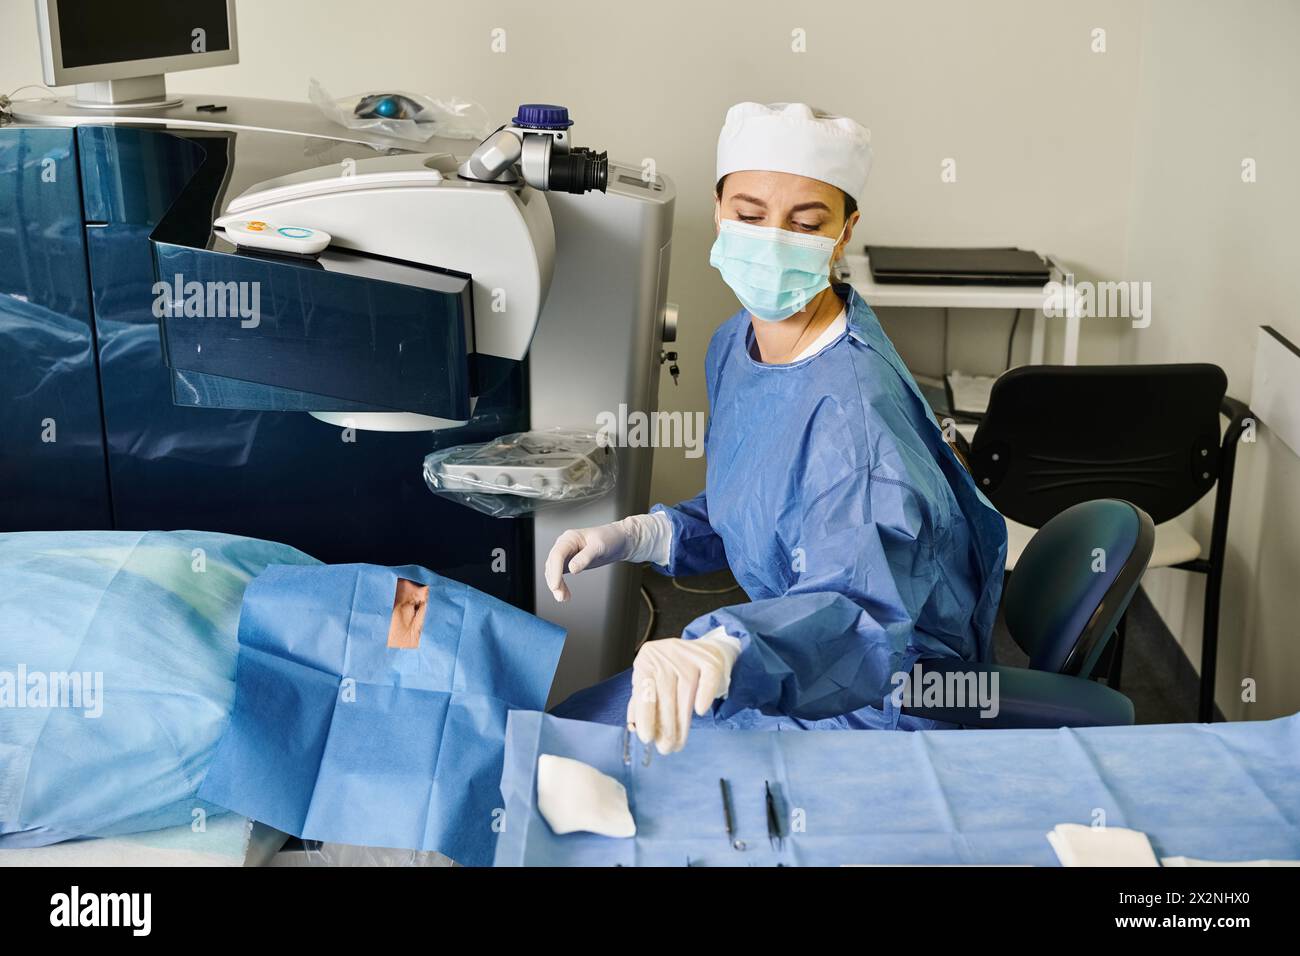 A woman wearing a surgical mask in a hospital room during a medical procedure. Stock Photo